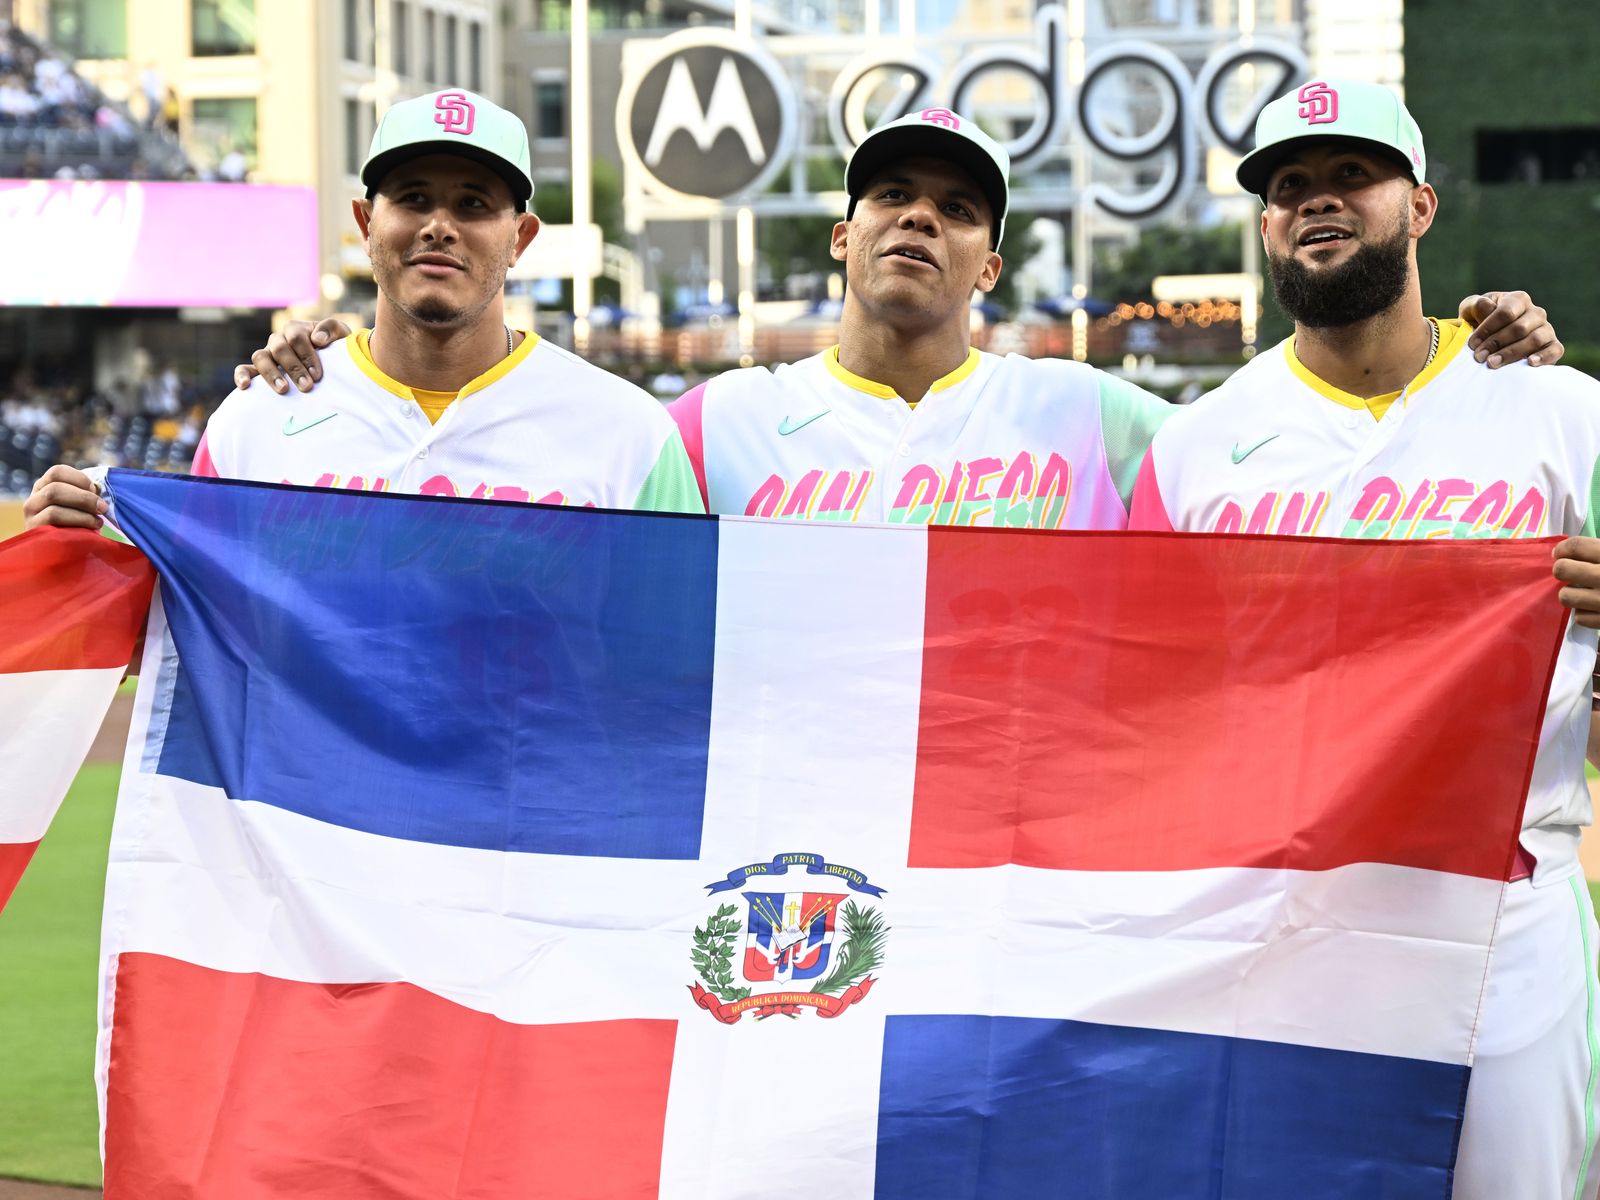 Baseball-Dominican Republic rallies past Israel to advance to